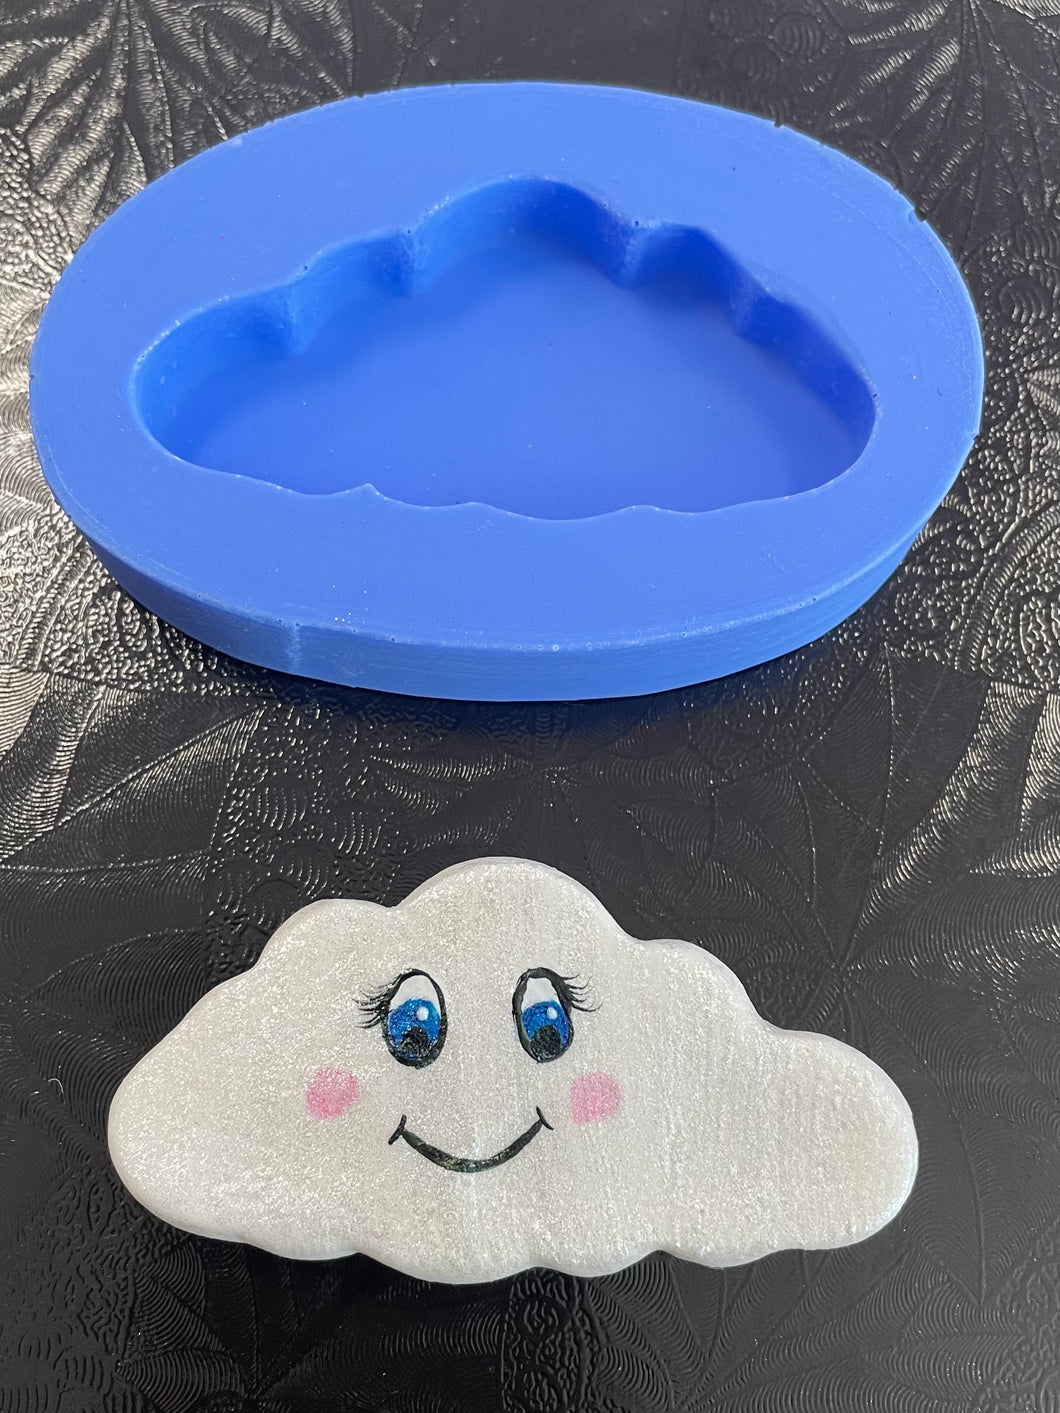 Silicone Mold - Cloud 2 $8.99